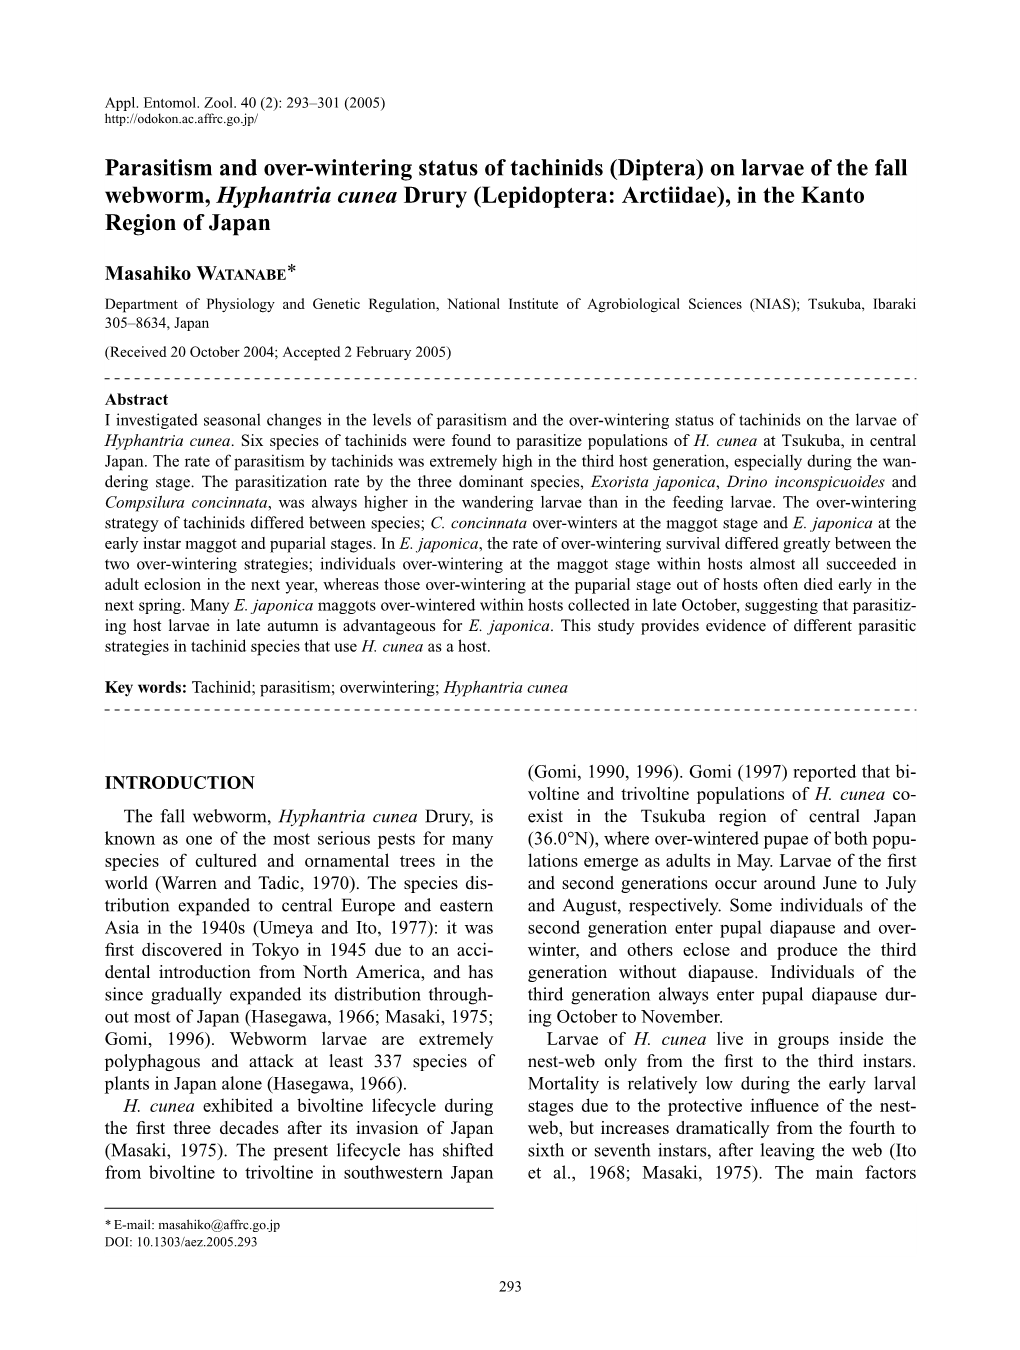 Parasitism and Over-Wintering Status of Tachinids (Diptera) on Larvae of the Fall Webworm, Hyphantria Cunea Drury (Lepidoptera: Arctiidae), in the Kanto Region of Japan